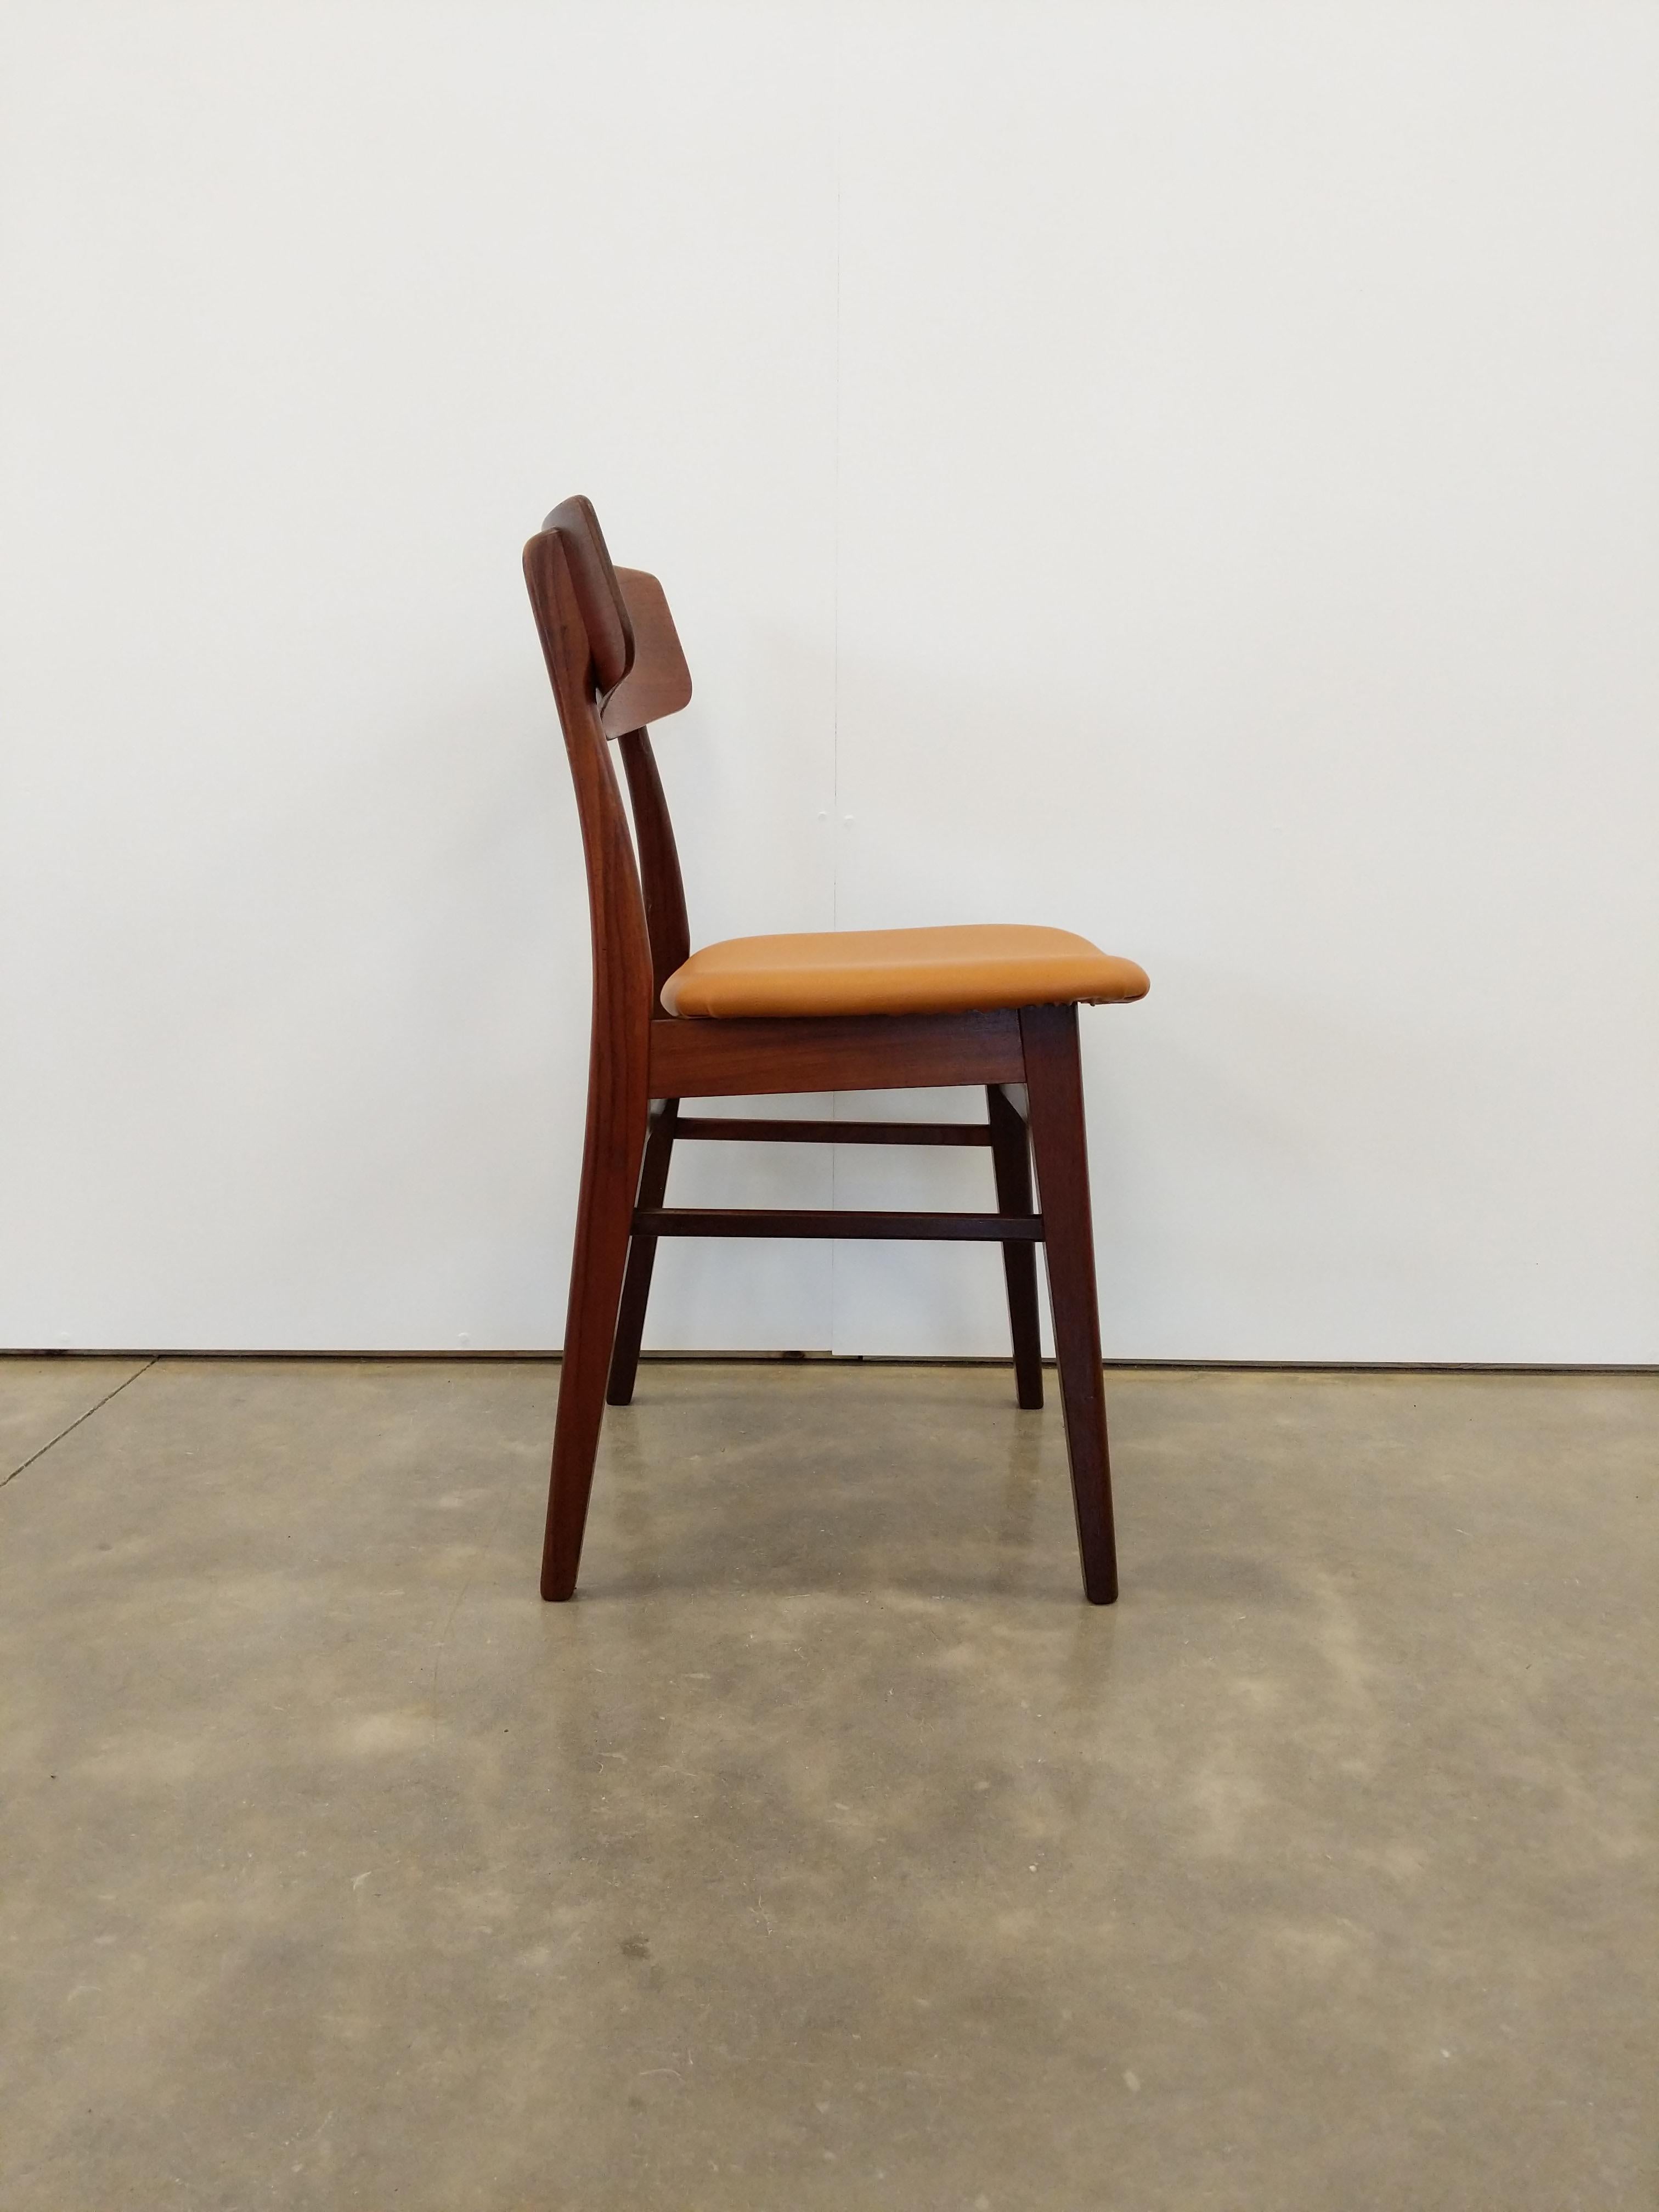 Authentic vintage mid century Danish / Scandinavian Modern dining chair.

This chair is in excellent refurbished condition with brand new Knoll upholstery (see photos).

If you would like any additional details, please contact us.

Dimensions:
31”